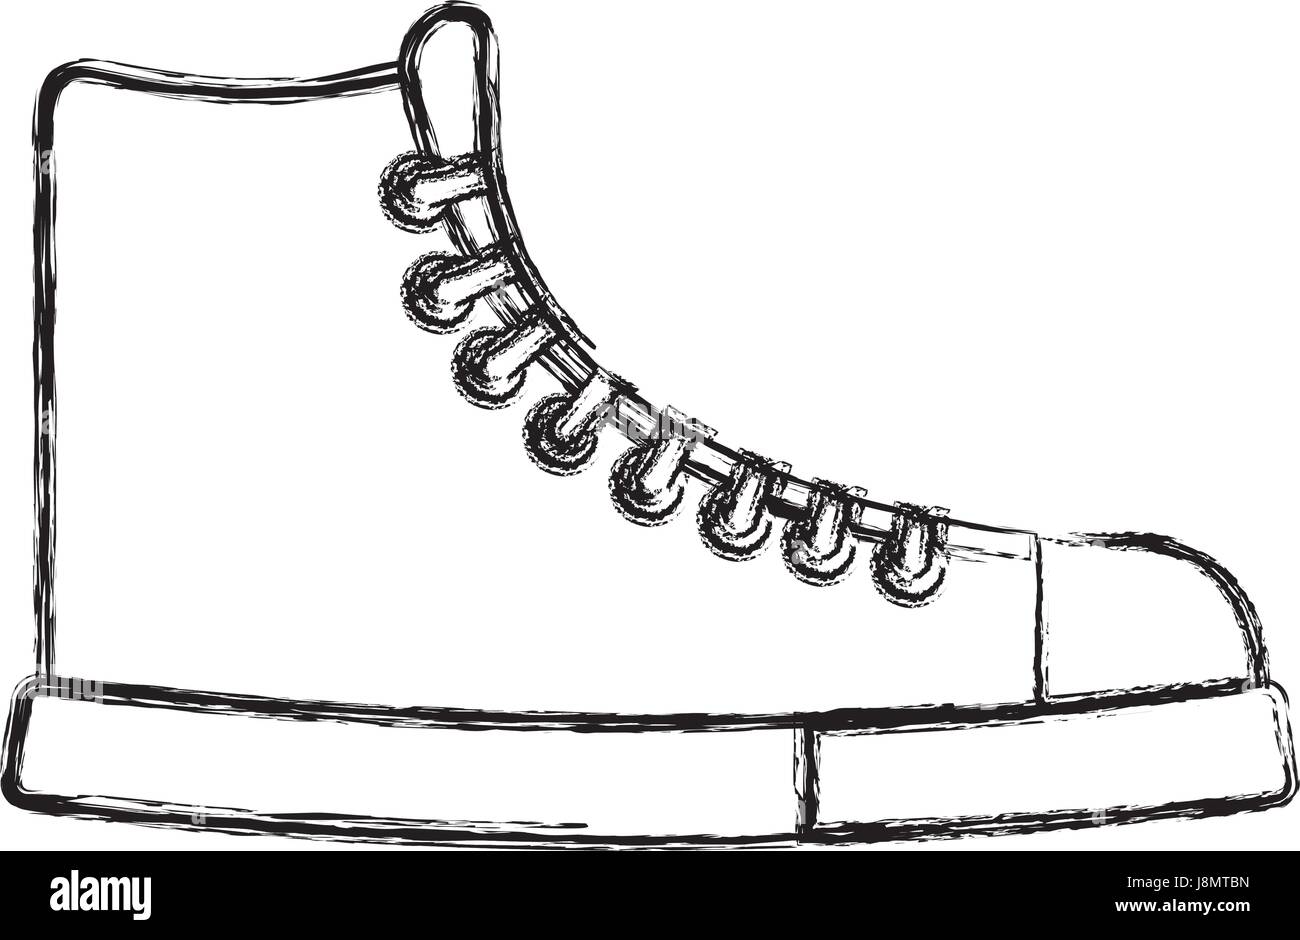 Cowboy Boots Drawing - How To Draw Cowboy Boots Step By Step